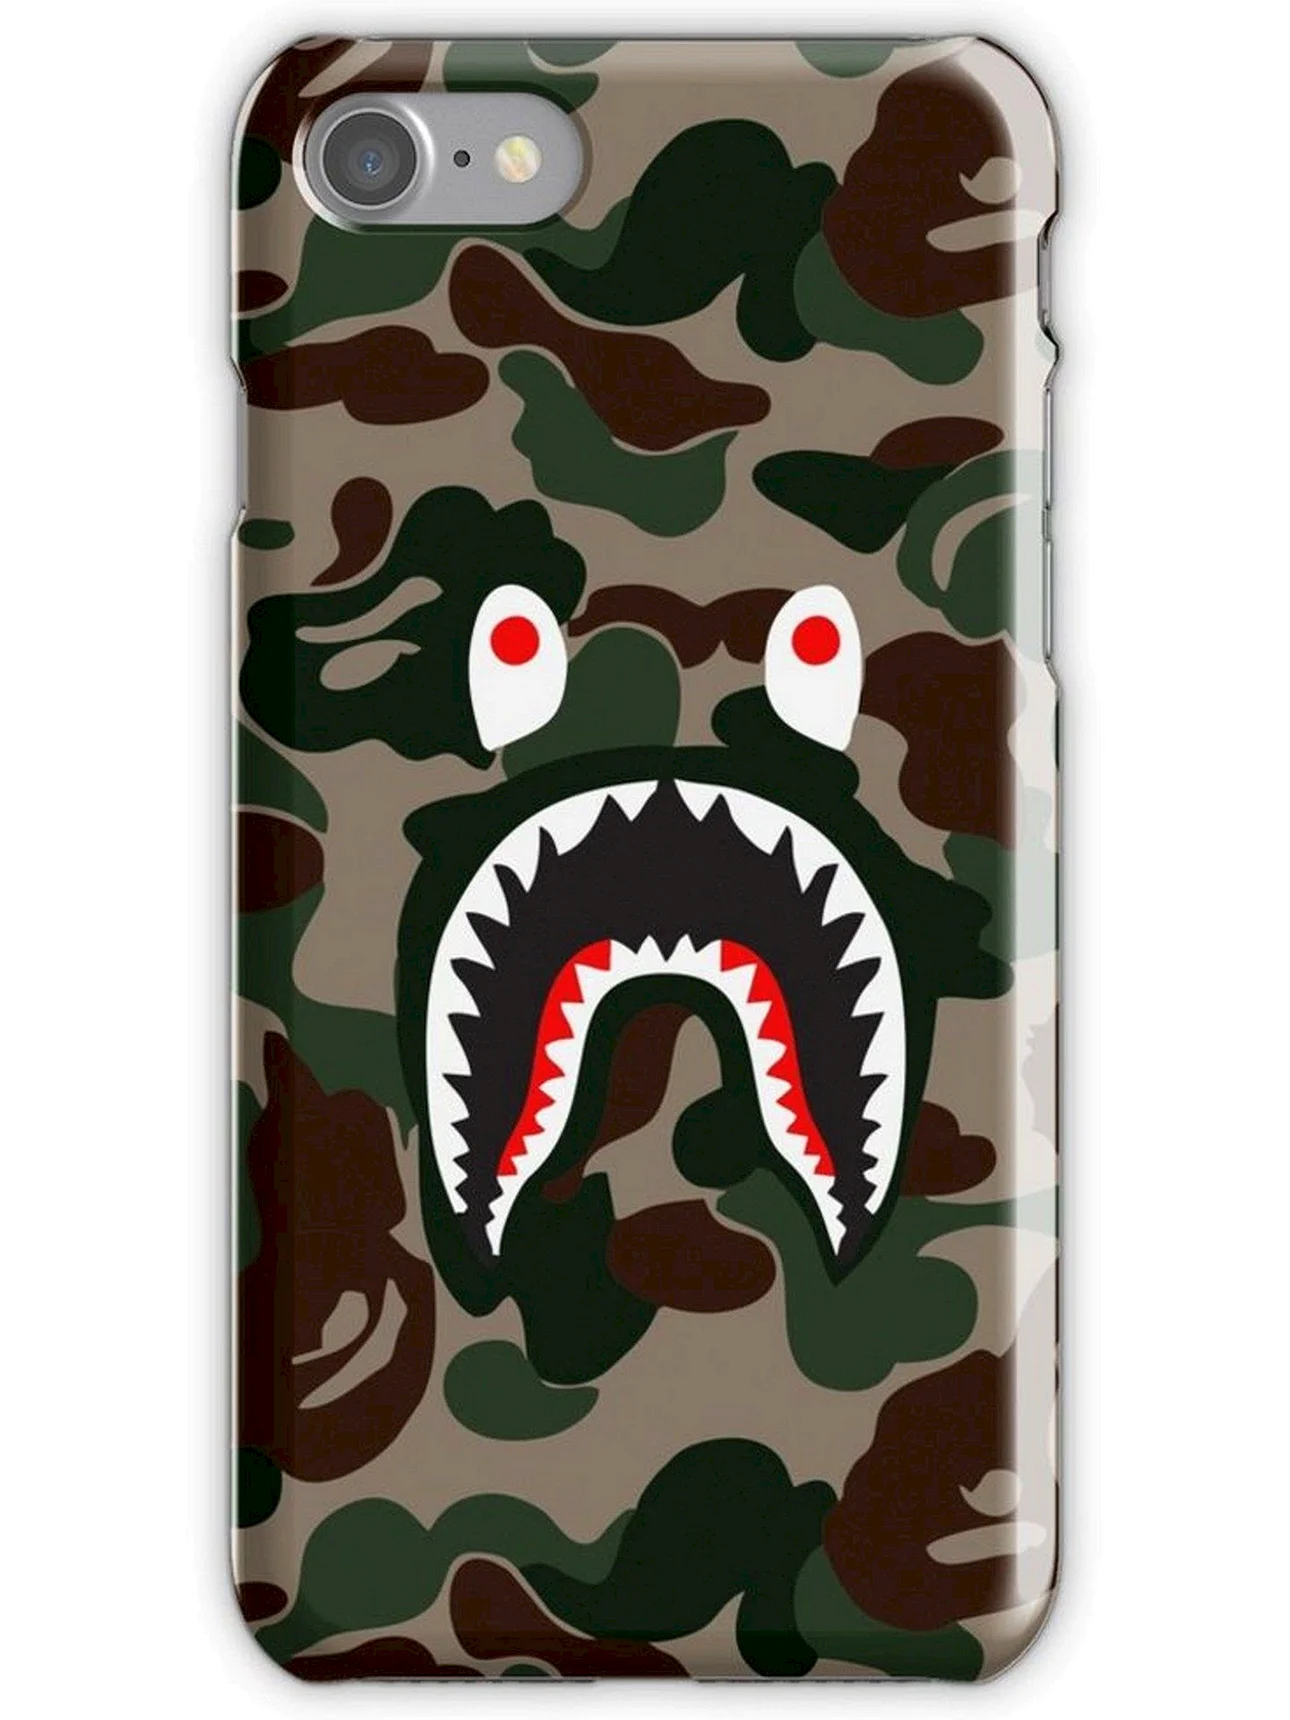 Case iPhone Bape Wallpaper For iPhone